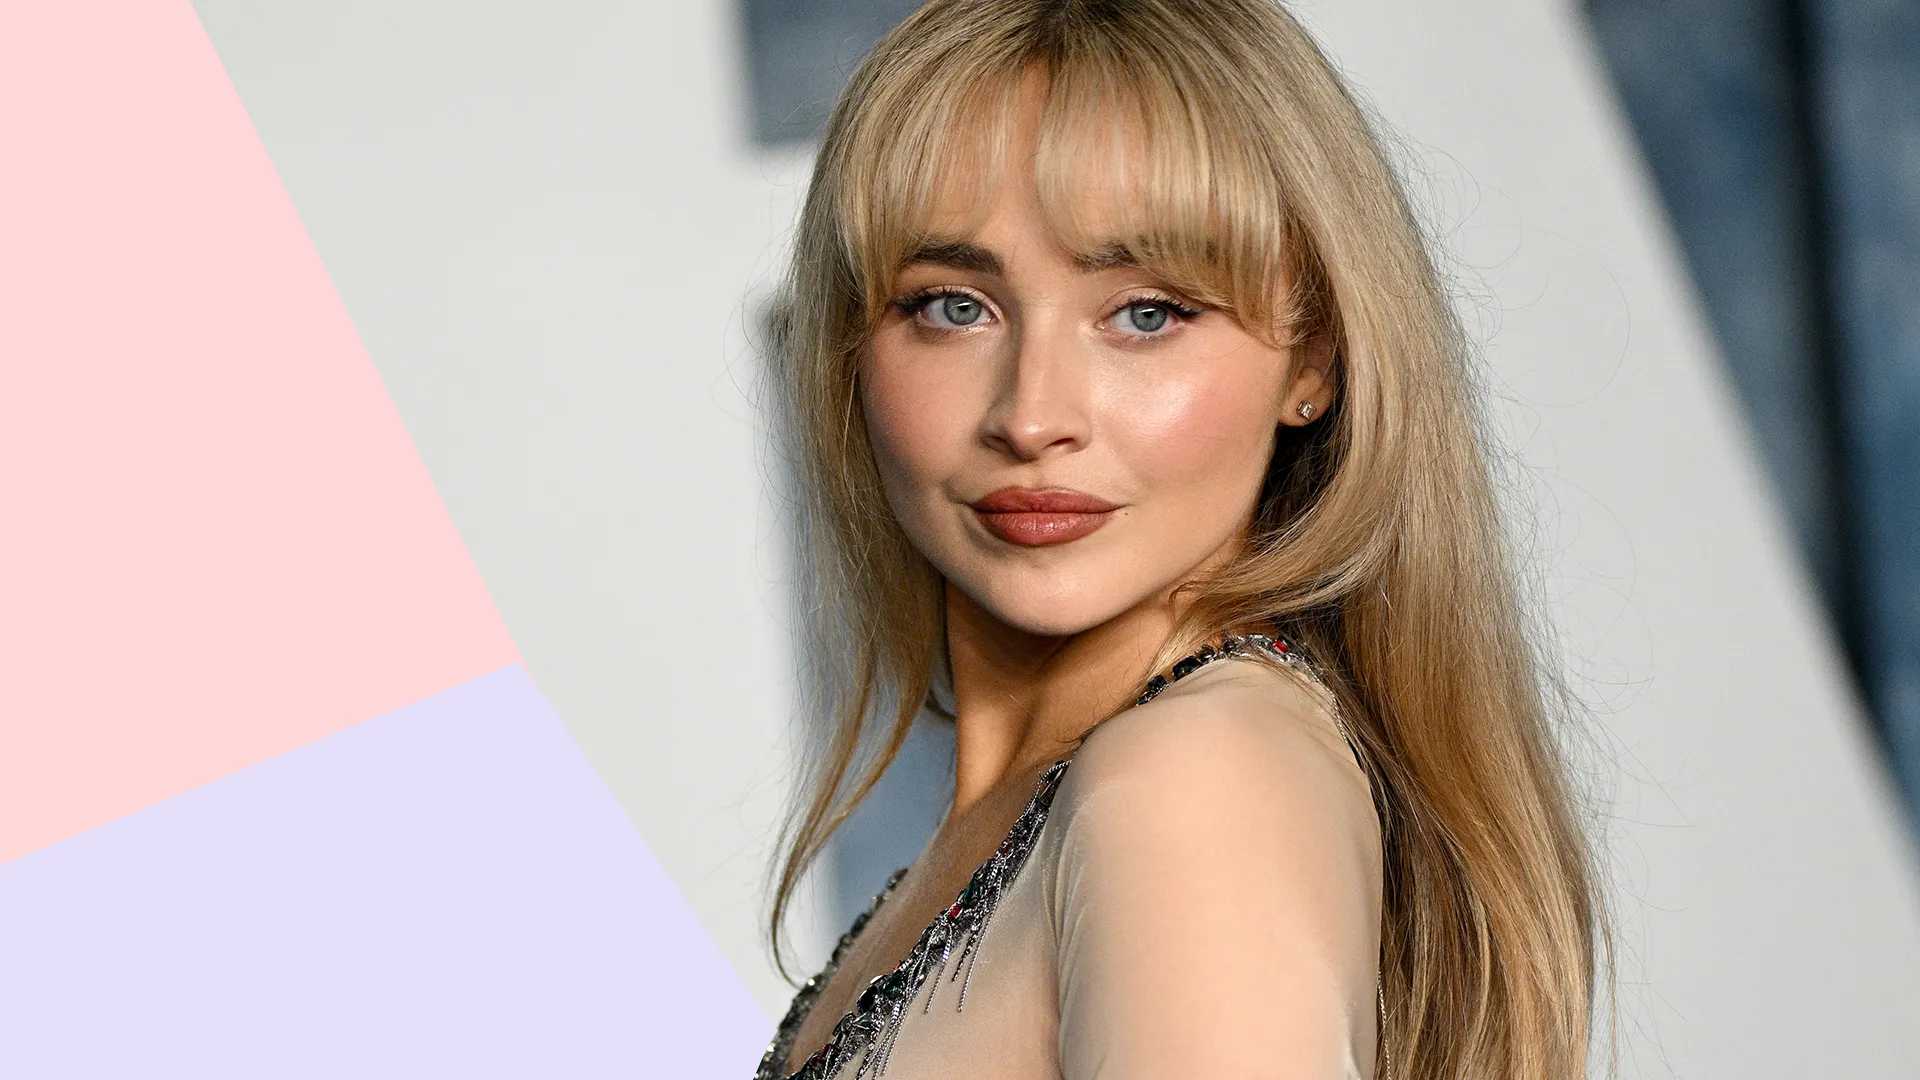 Everything to know about Sabrina Carpenter's dating history and past relationships